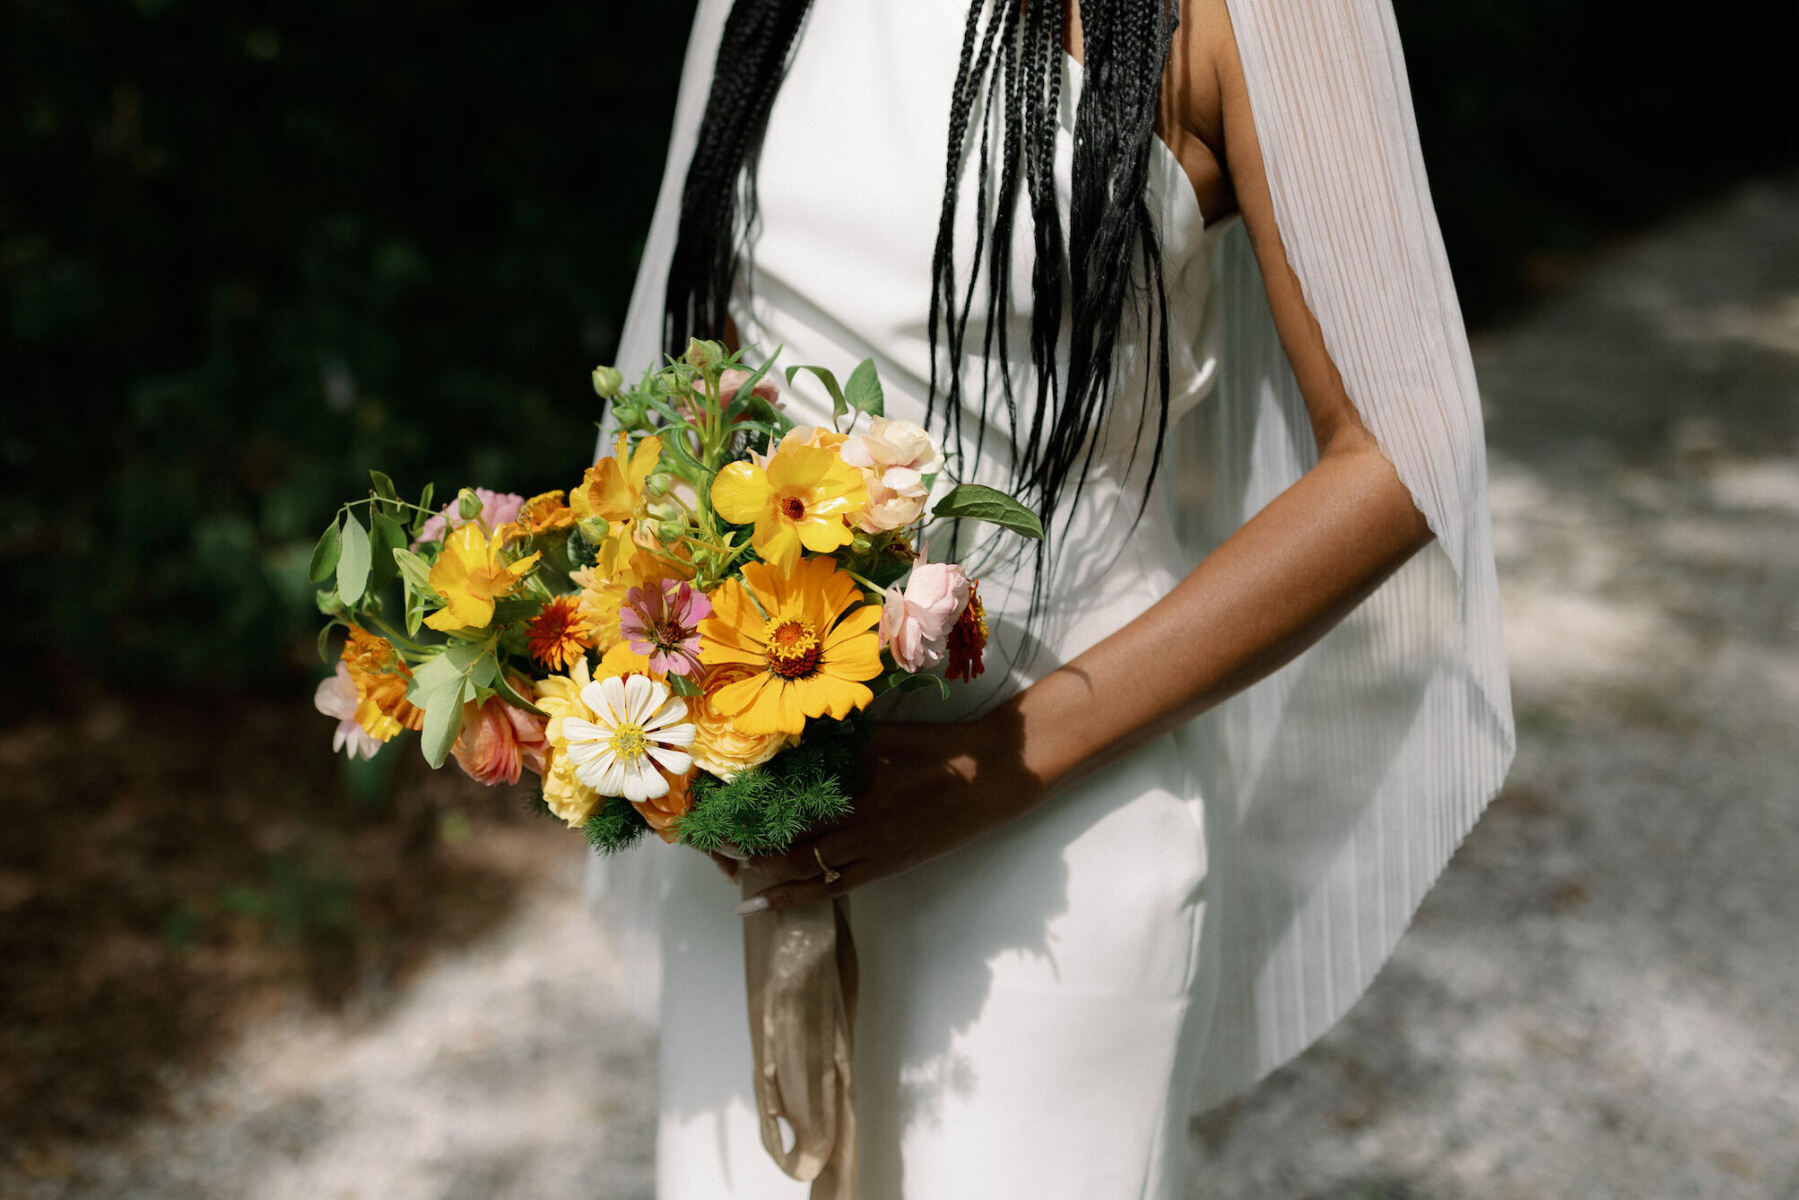 A bride holds a yellow and pink bouquet at her authentic modern wedding.